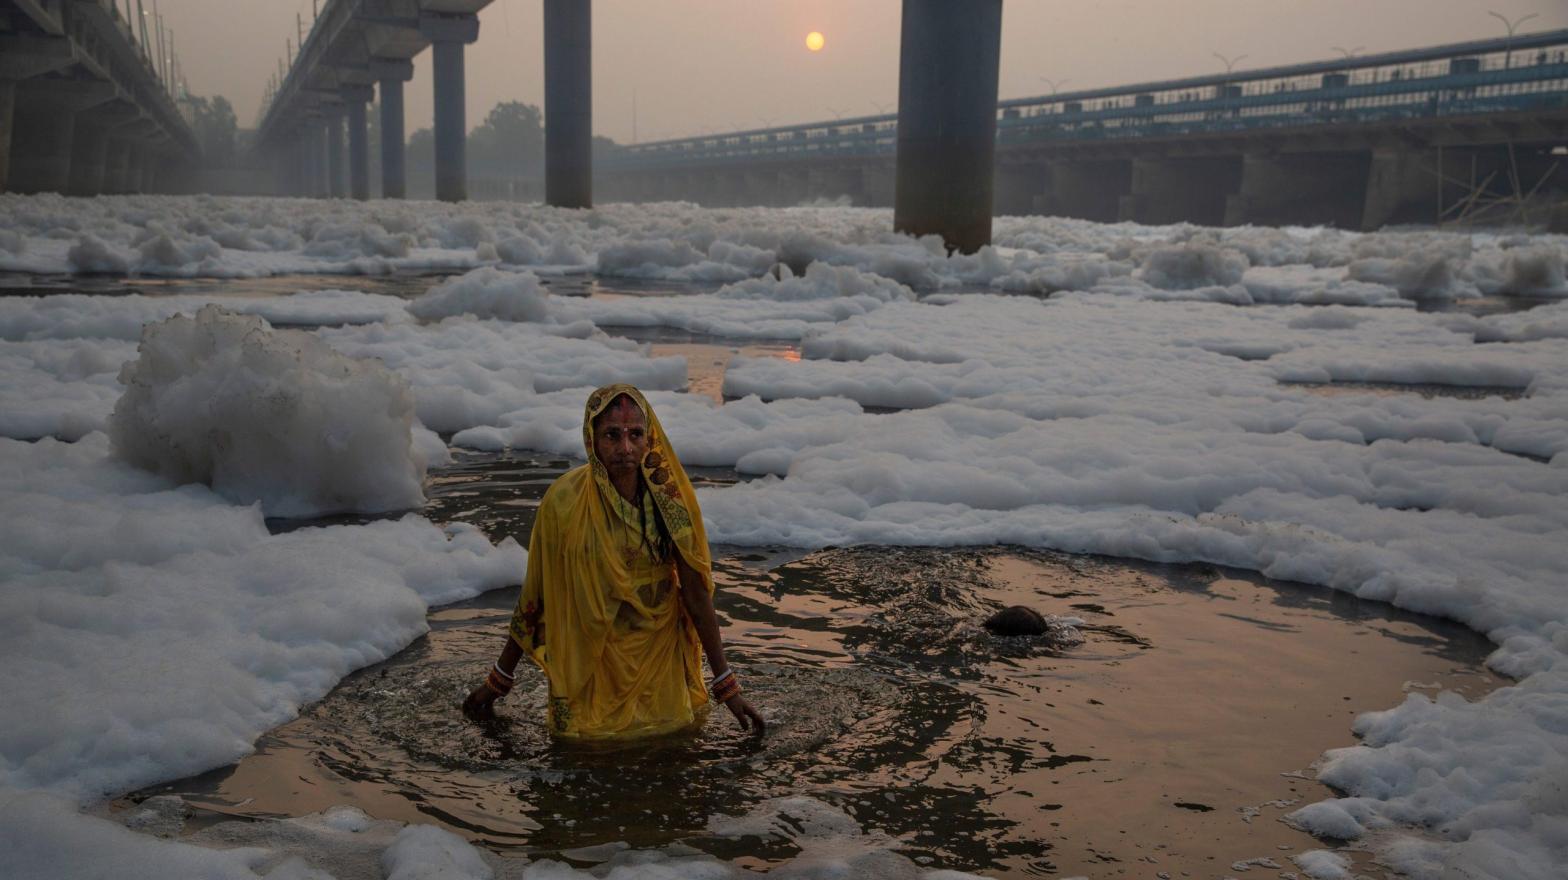 A woman wades into the Yamuna river, covered by chemical foam caused due to industrial and domestic pollution, during Chhath Puja festival. (Photo: Altaf Qadri, AP)